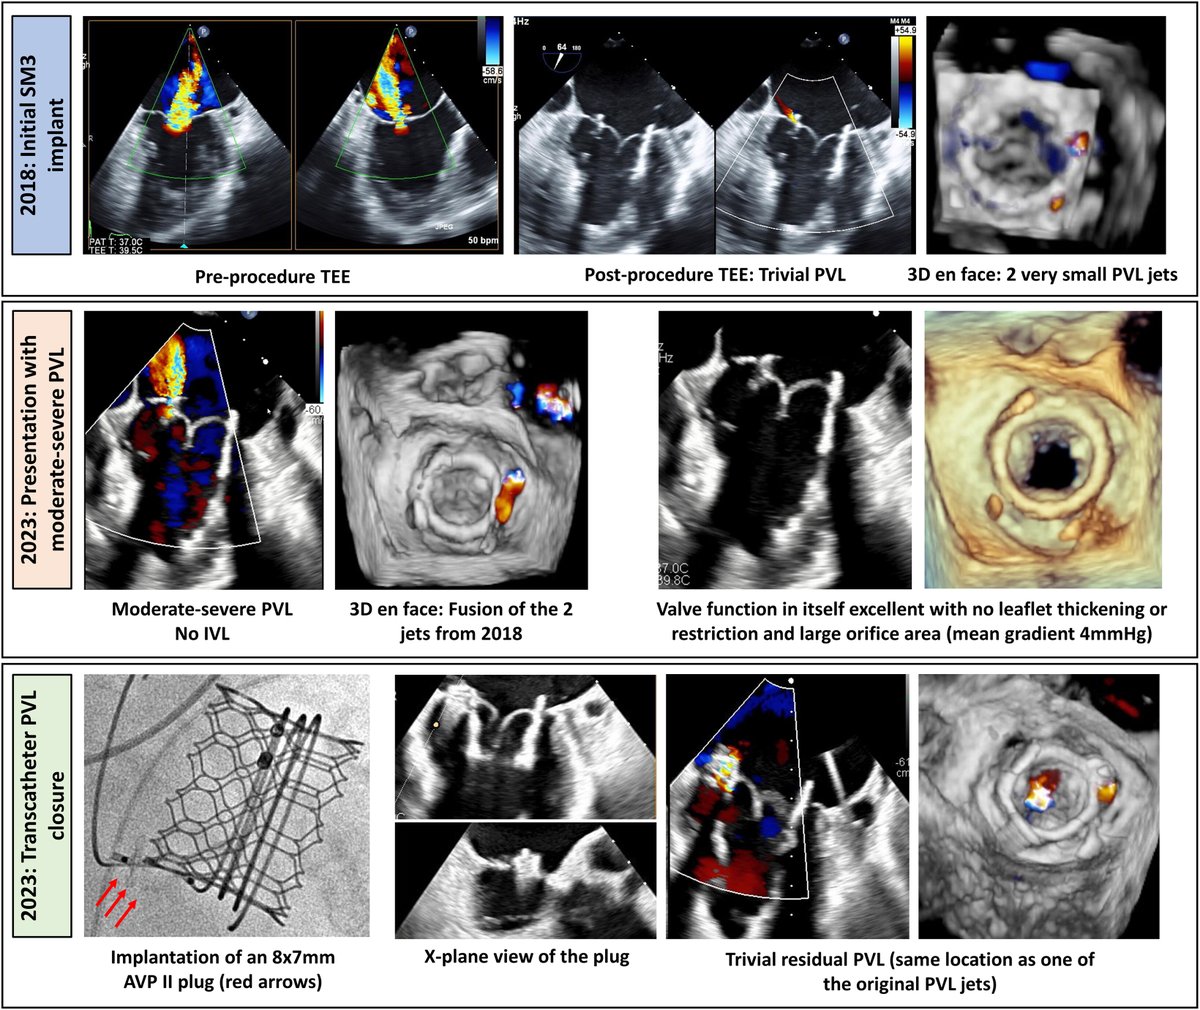 In this first long-term follow-up report of #TMVR with the SM3 device, there was normal prosthetic leaflet function with no sign of degeneration at 5 years. bit.ly/3tva243 #JACCINT @AliSahebHusain @myriam_akodad @David_Meier_